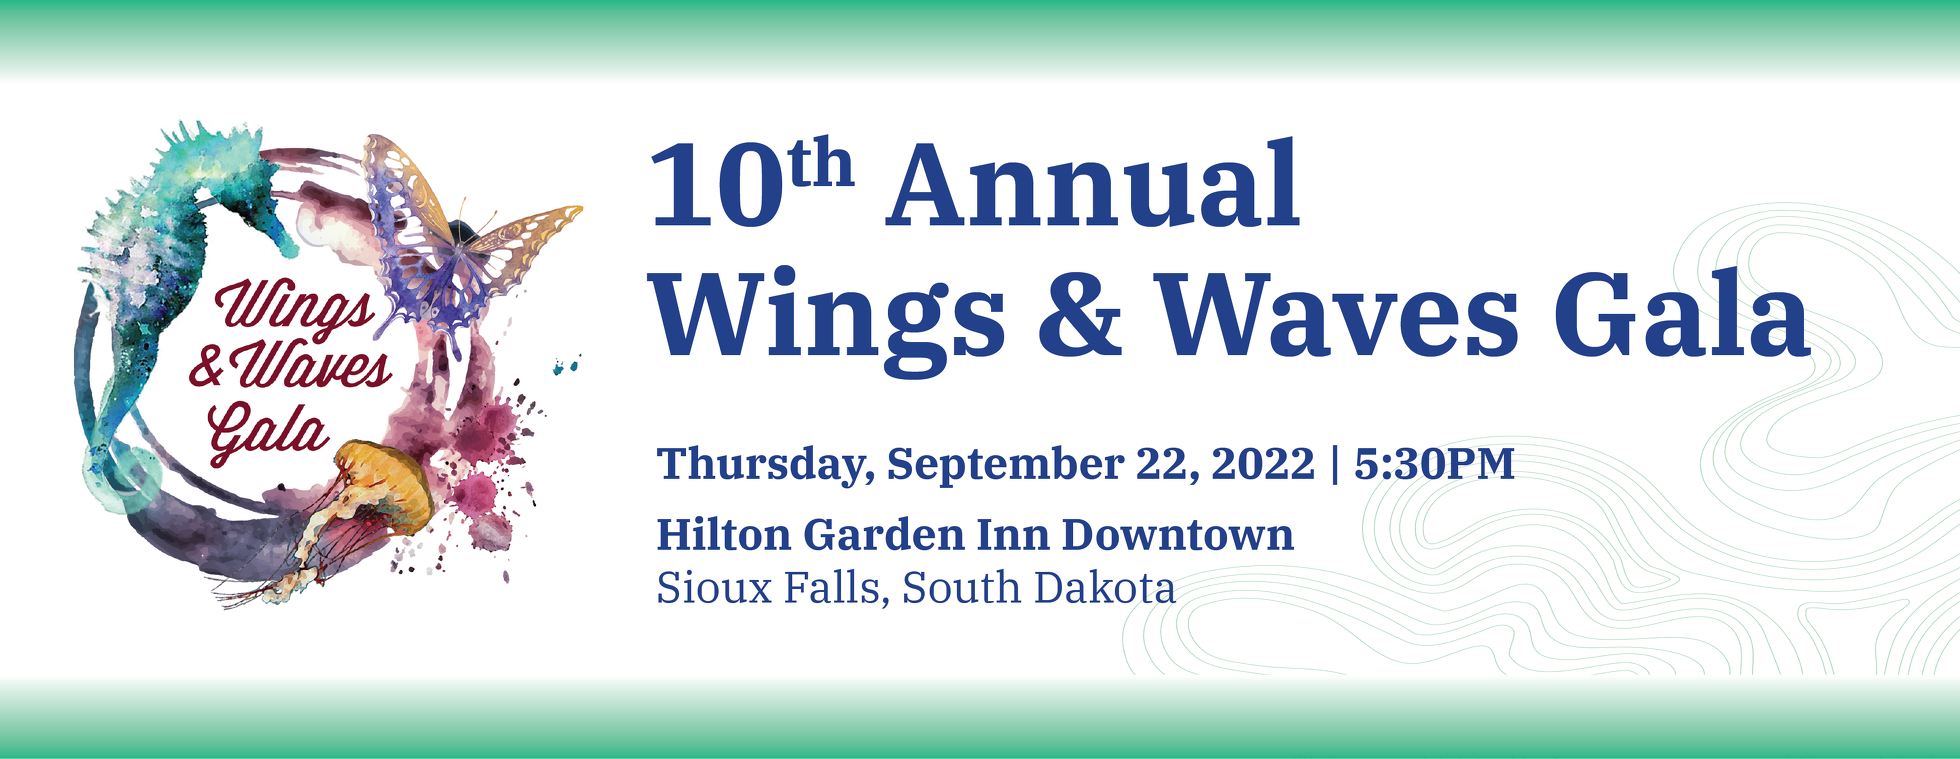 10th Annual Wings & Waves Gala